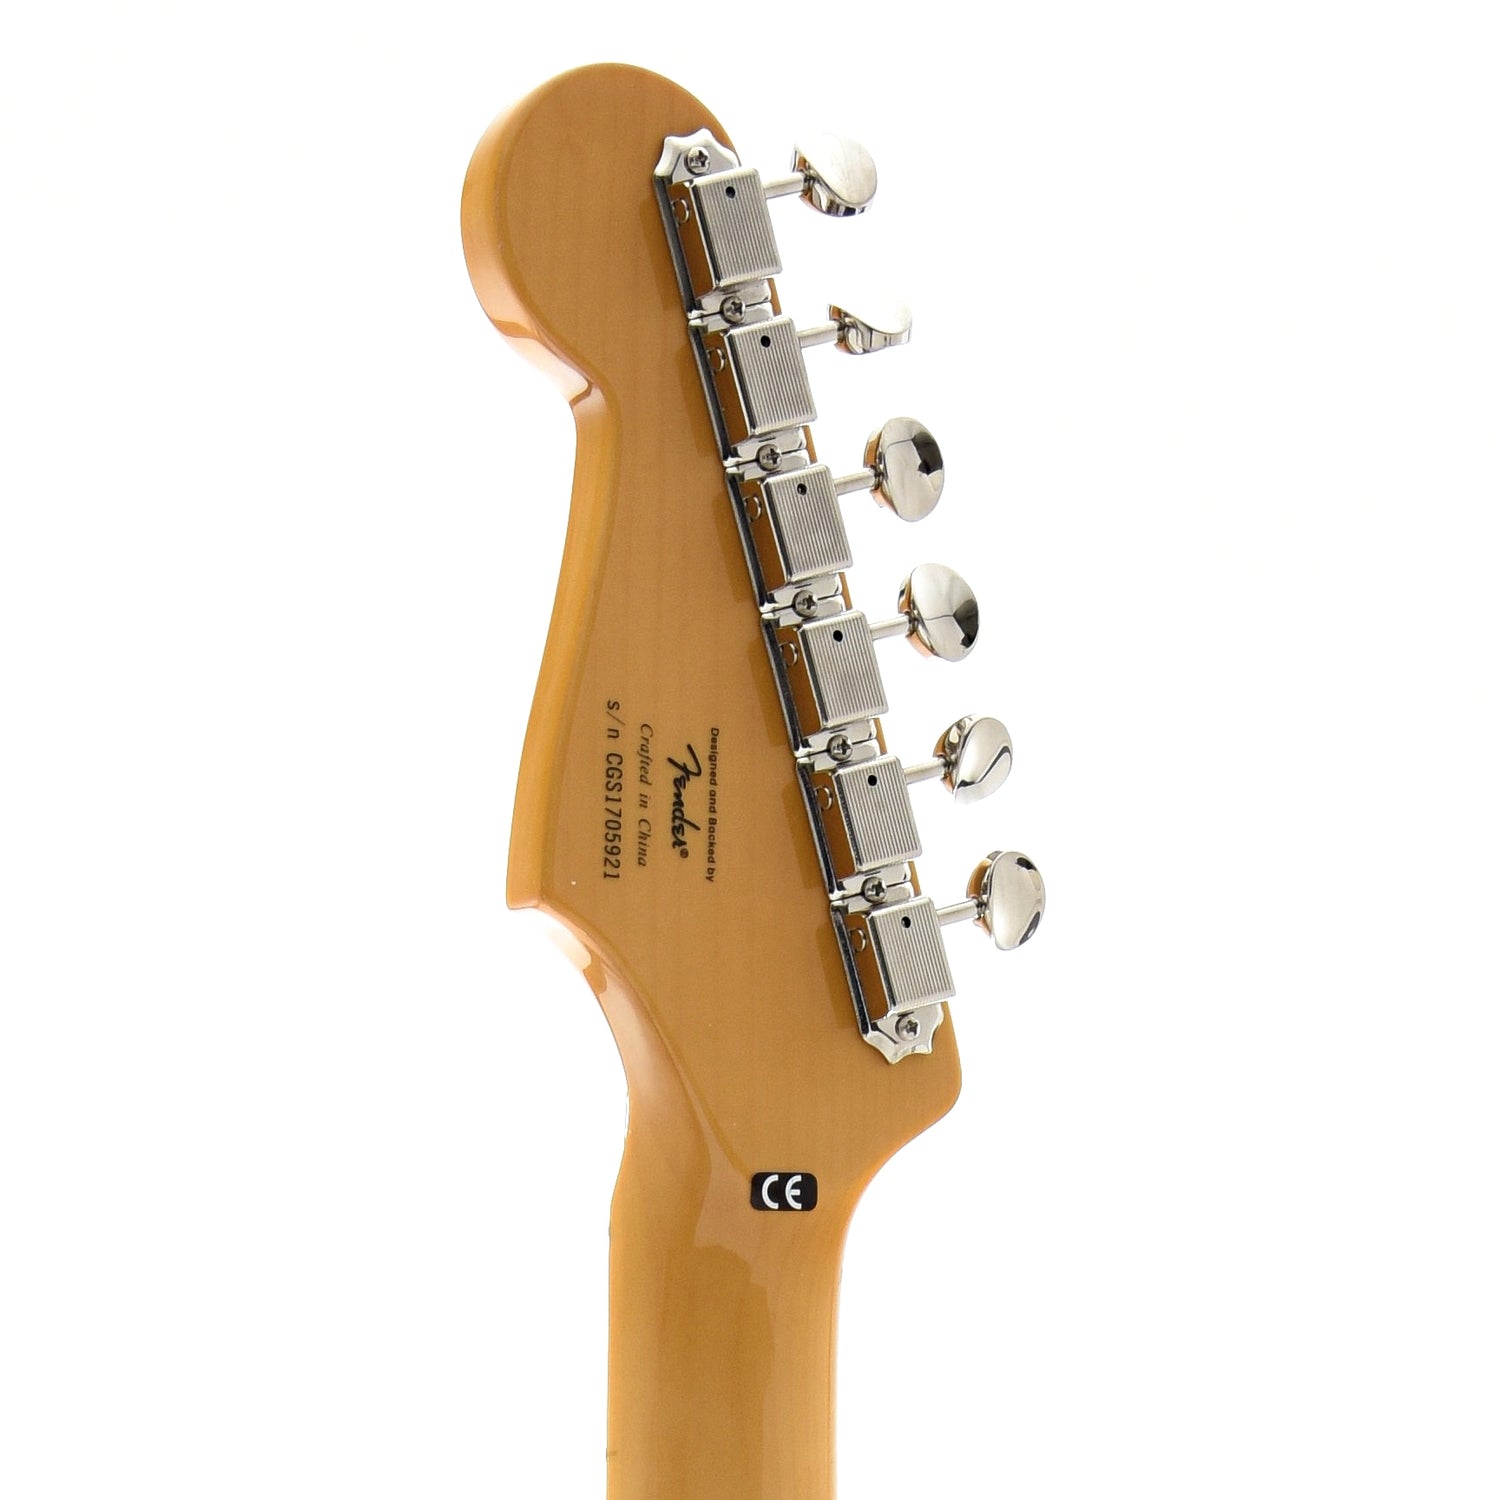 Image 8 of Squier Classic Vibe '50s Stratocaster, 2-Color Sunburst - SKU# SCVS5-2SB : Product Type Solid Body Electric Guitars : Elderly Instruments